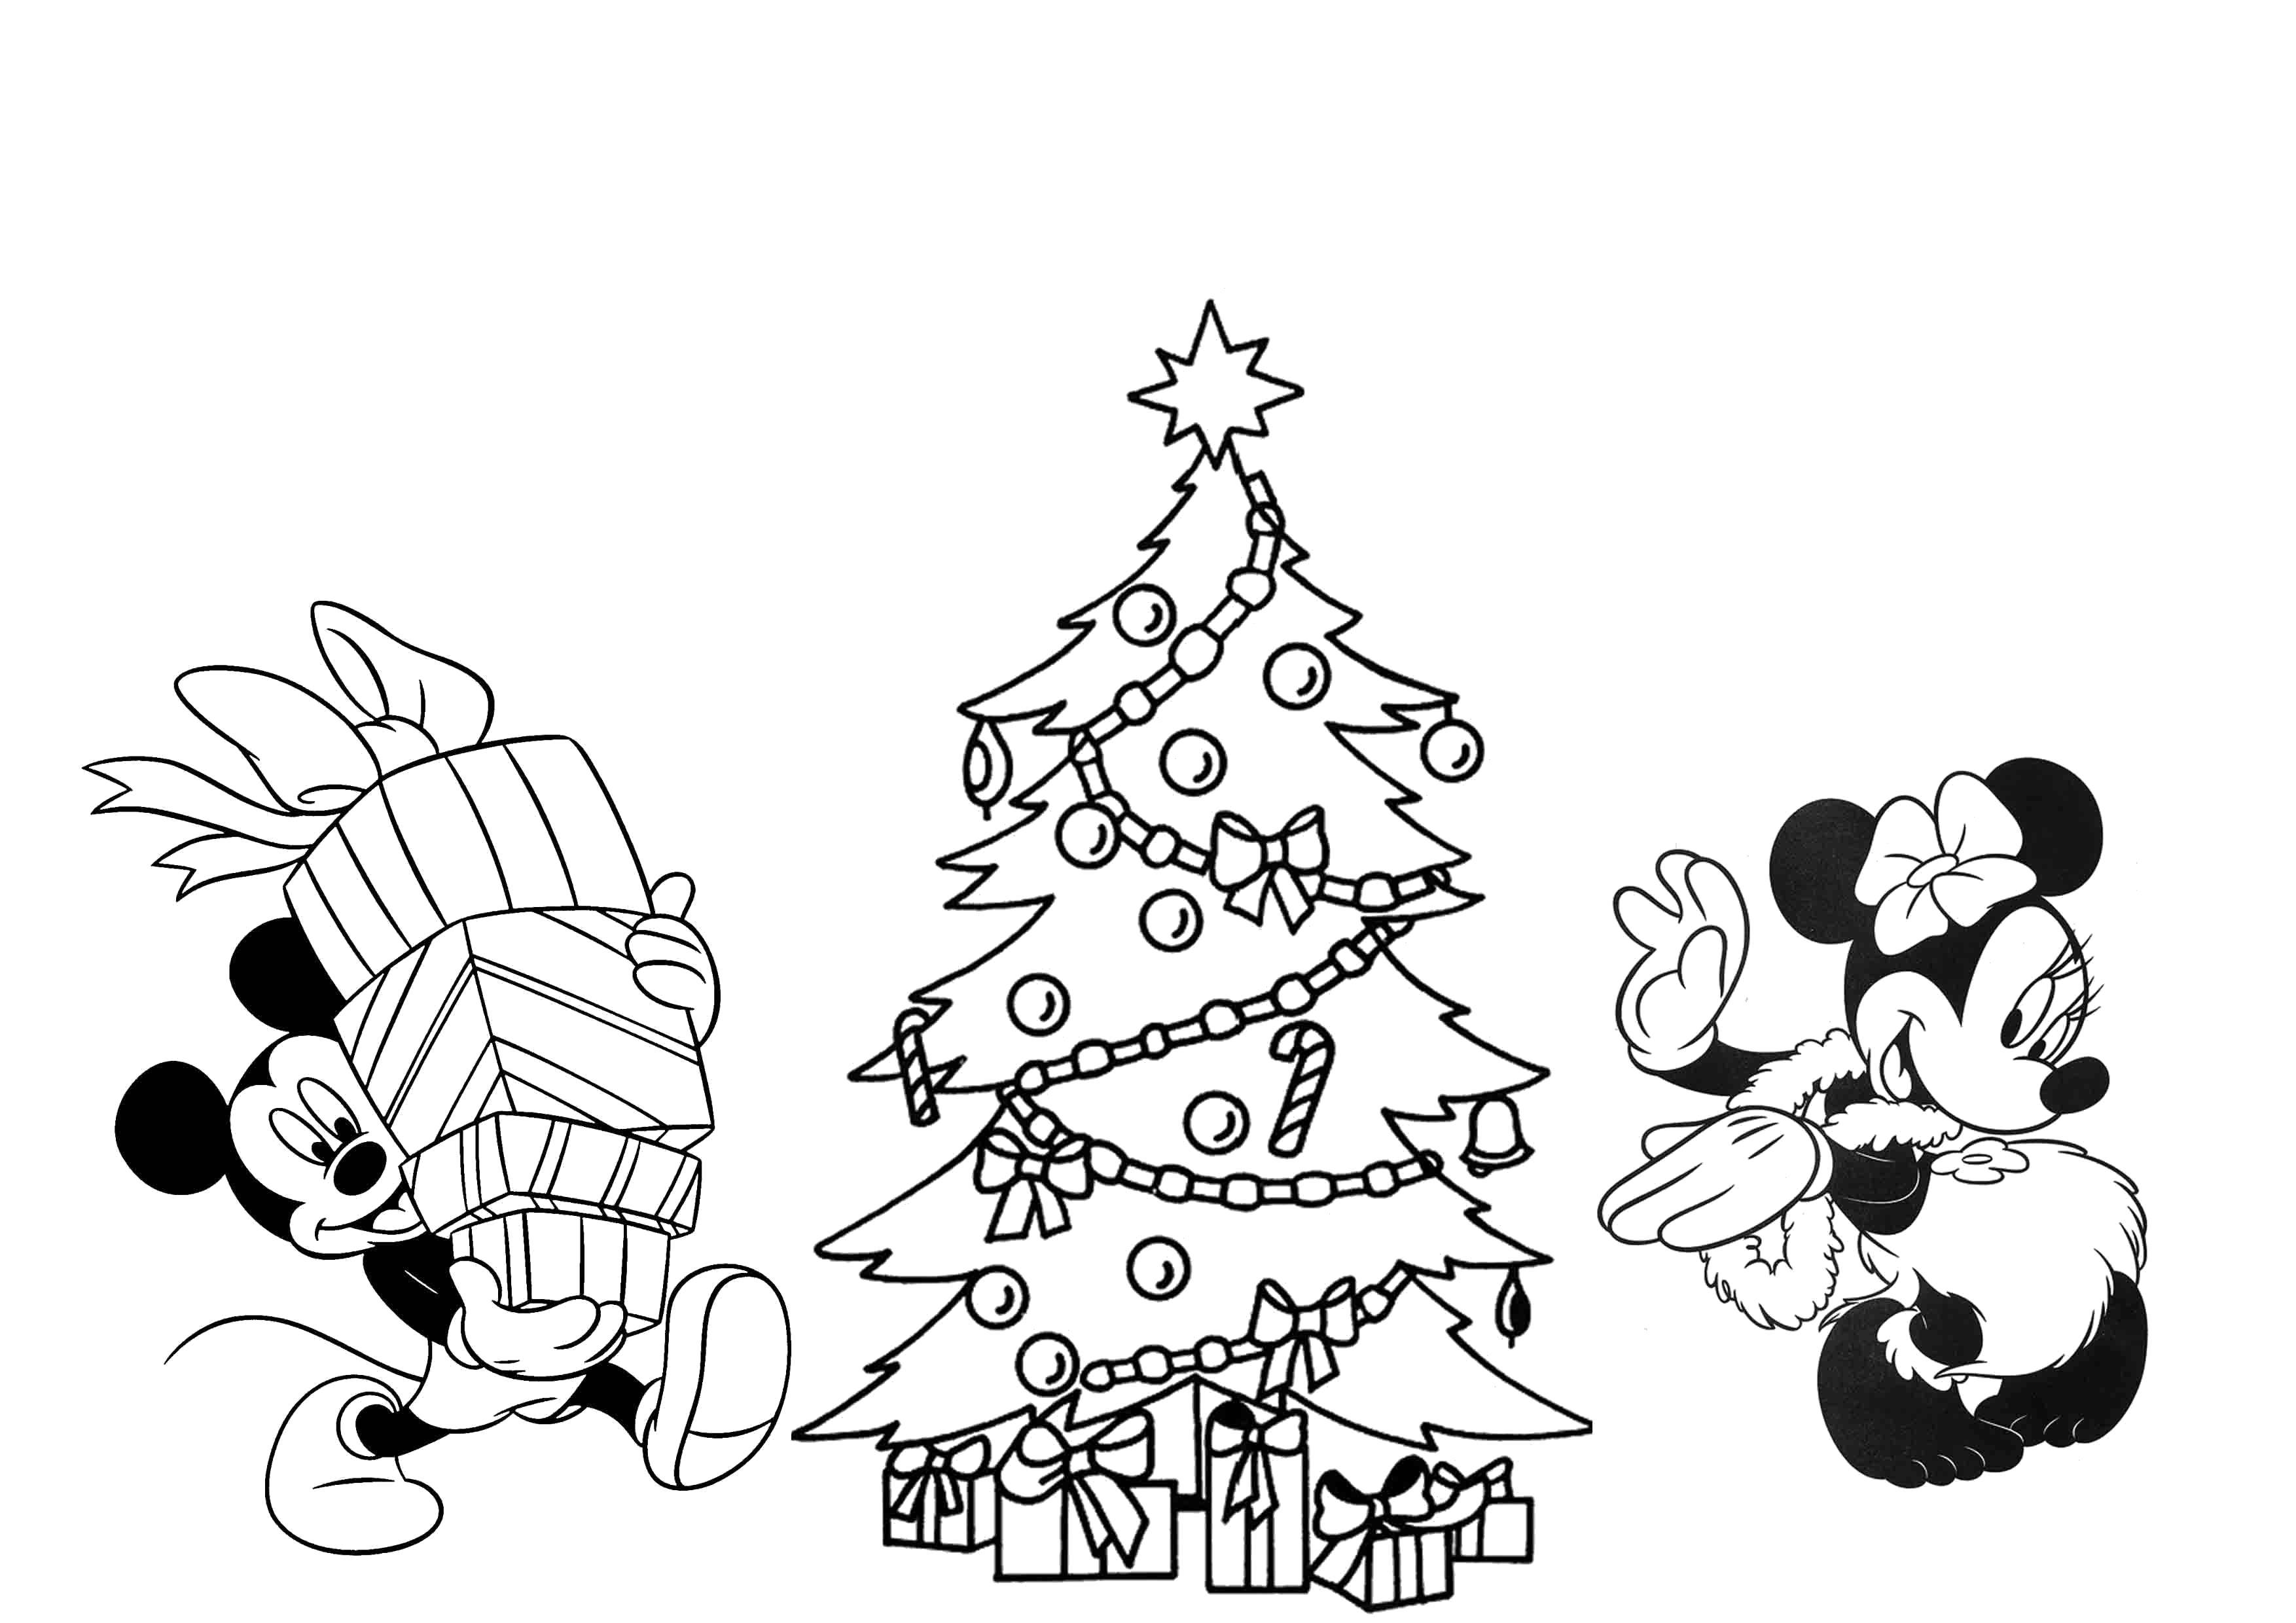 Coloring Mickey and Minnie mouse. Category Christmas. Tags:  Christmas, Christmas toy, Christmas tree, gifts.